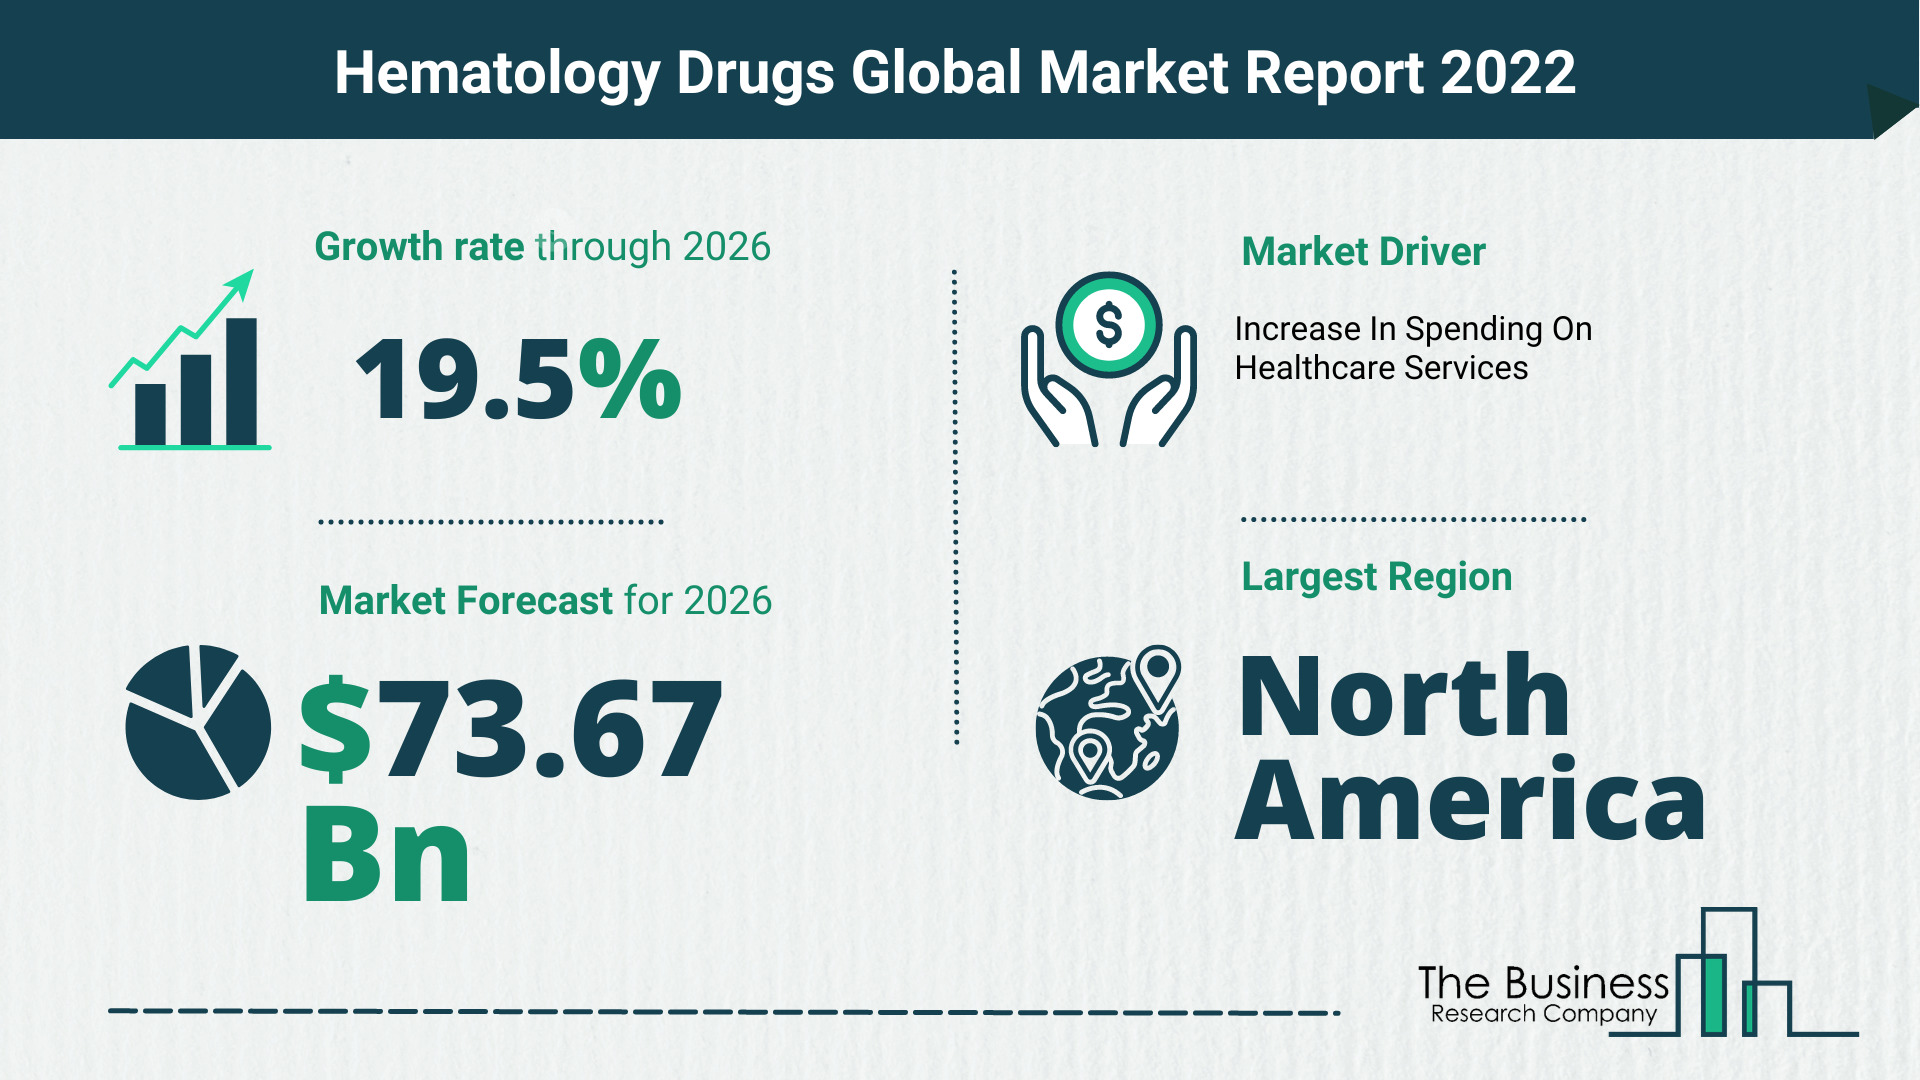 Latest Hematology Drugs Market Growth Study 2022-2026 By The Business Research Company